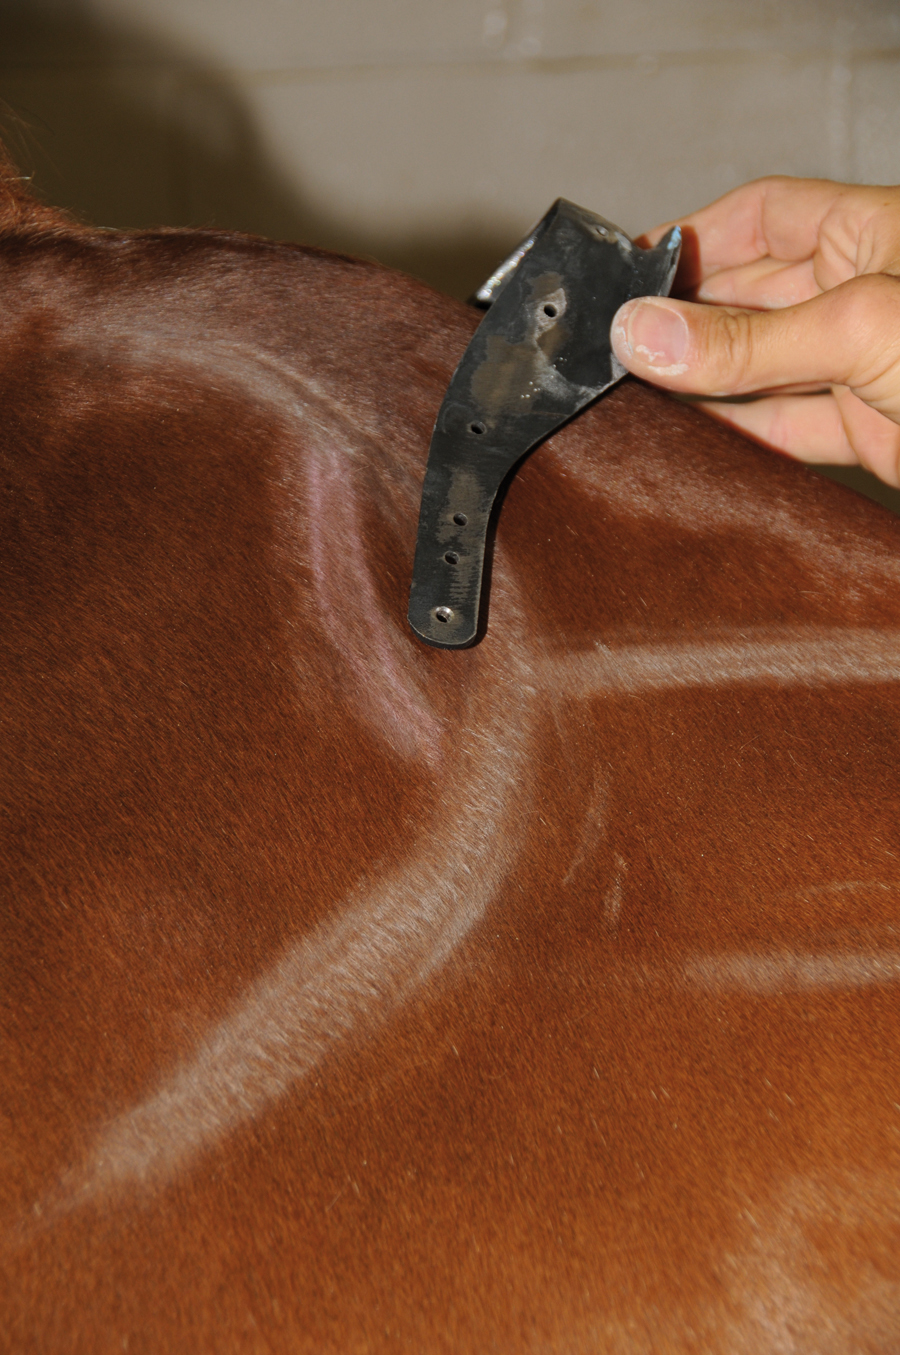 This photo shows a gullet plate with forward-facing tree points, which impacts the shoulder cartilage even if the saddle is positioned correctly behind the shoulder blade.